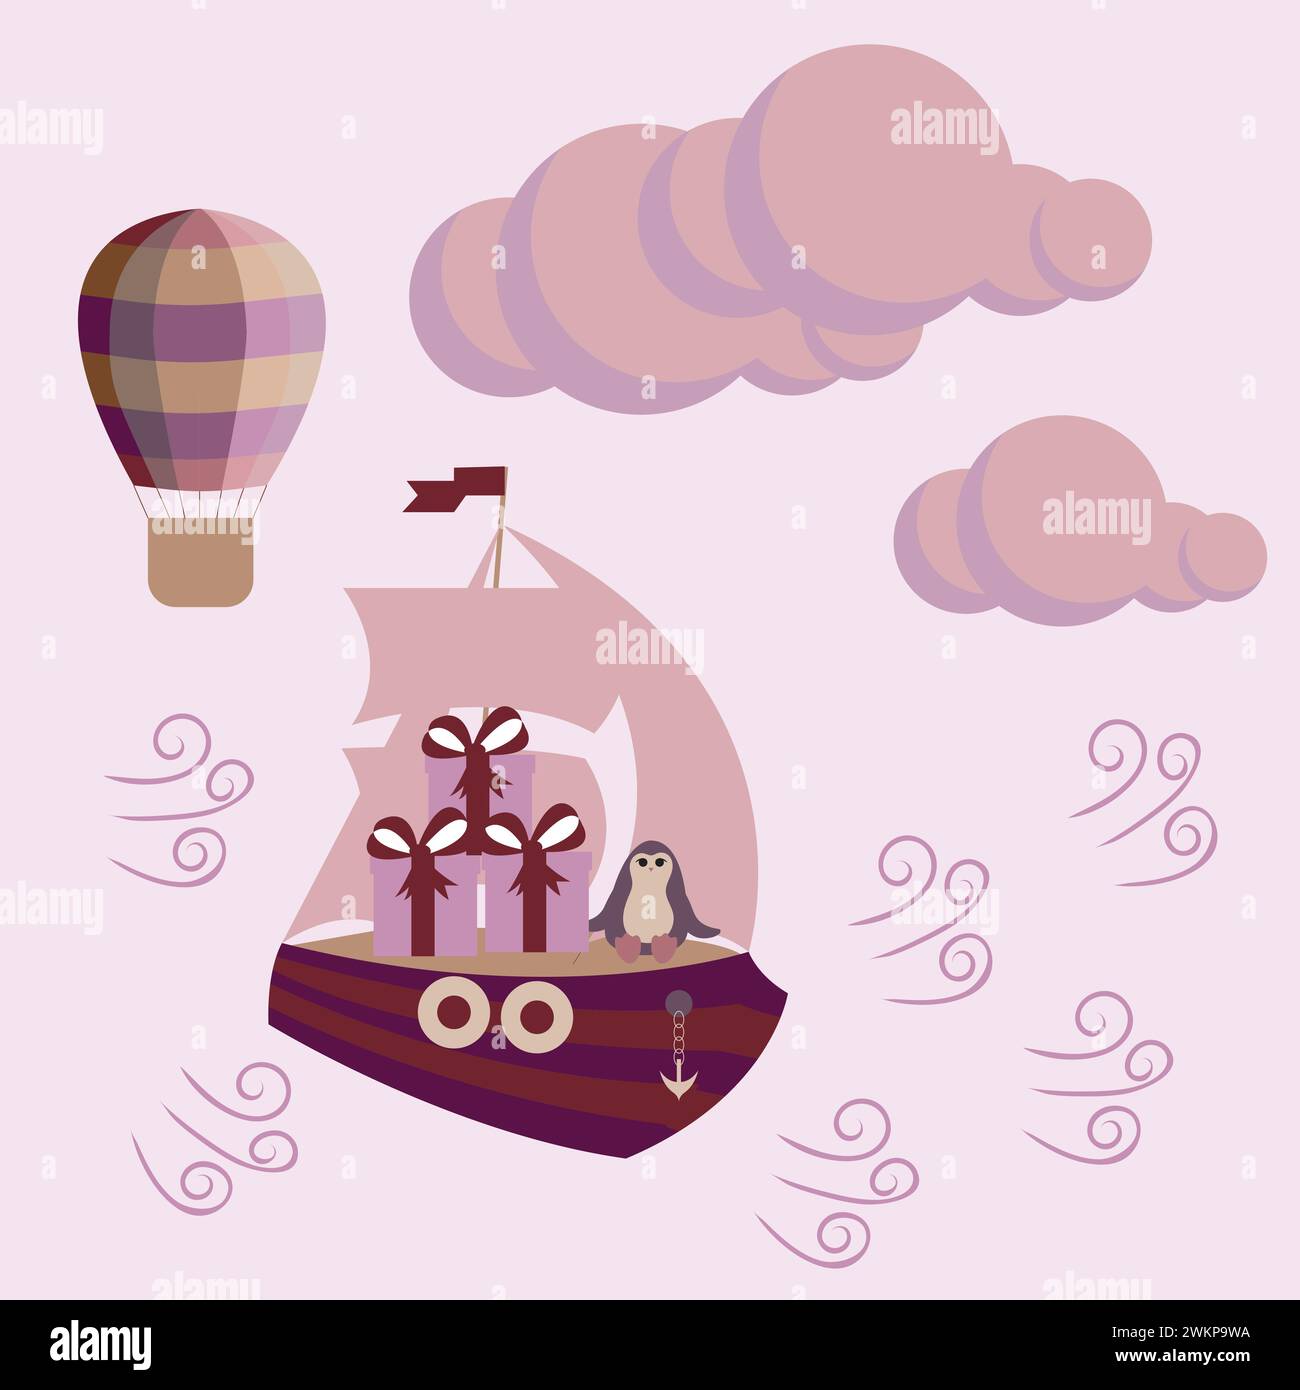 The penguin carries gifts on a sailing ship. In the distance you can see a hot air balloon among the Stock Vector